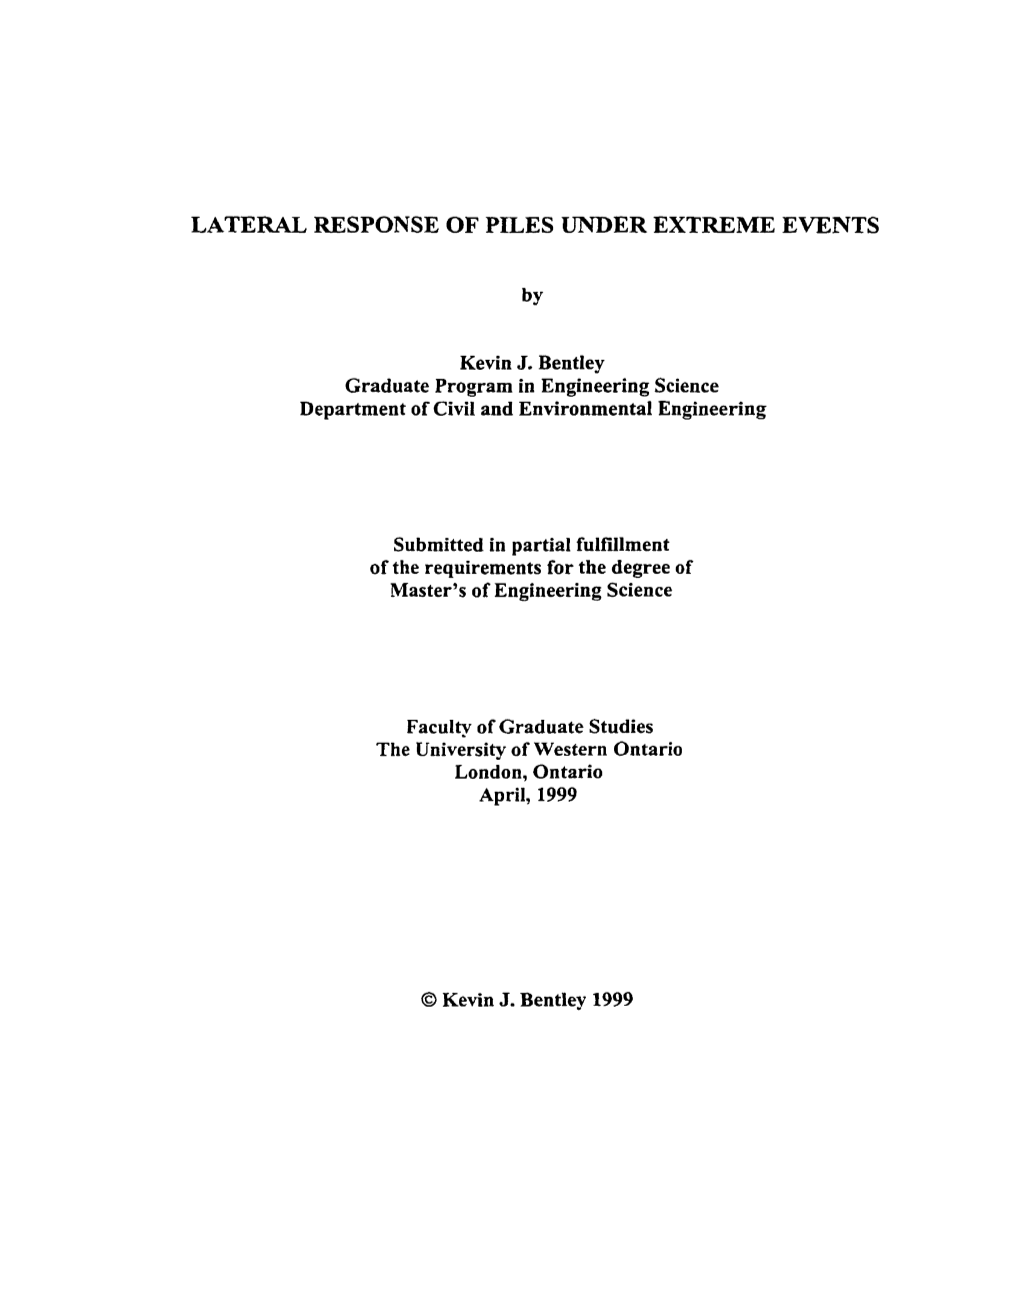 Lateral Response of Piles Under Extreme Events